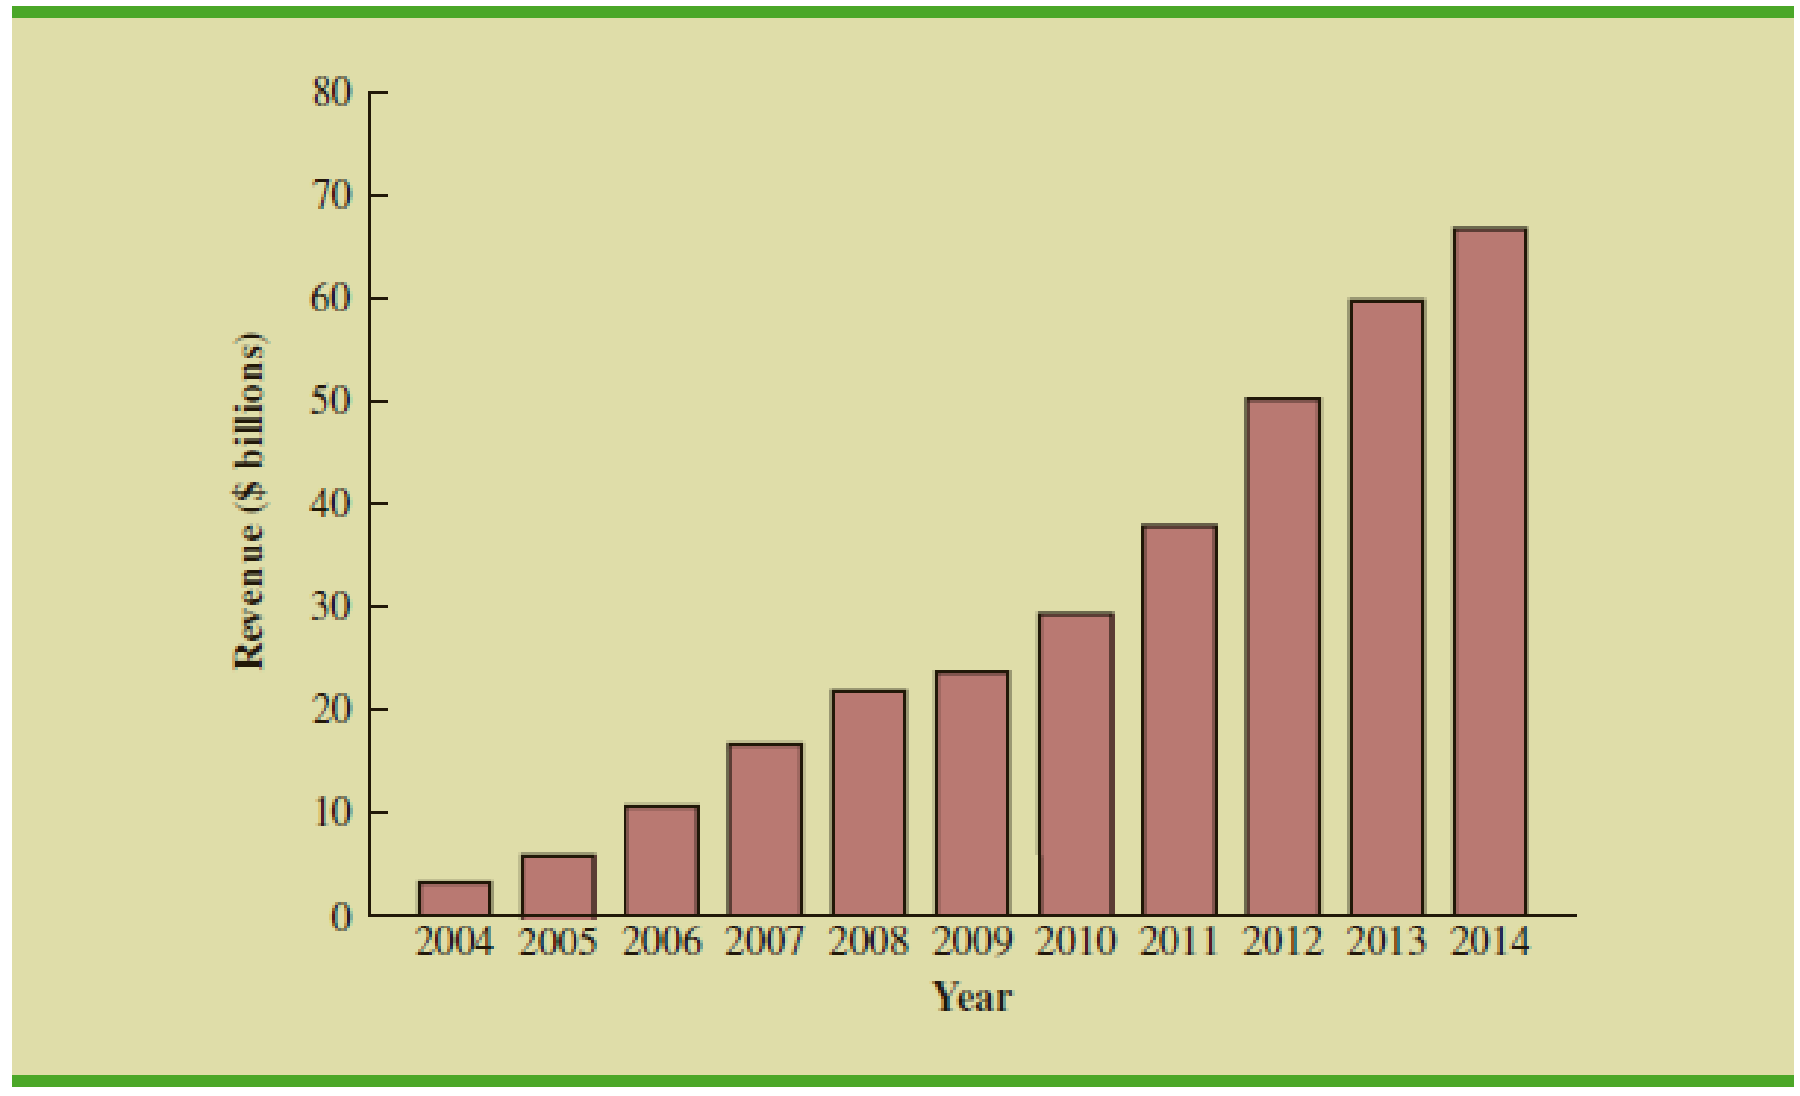 Chapter 1, Problem 13SE, Figure 1.10 provides a bar chart showing the annual revenue for Google from 2004 to 2014. (The Wall 